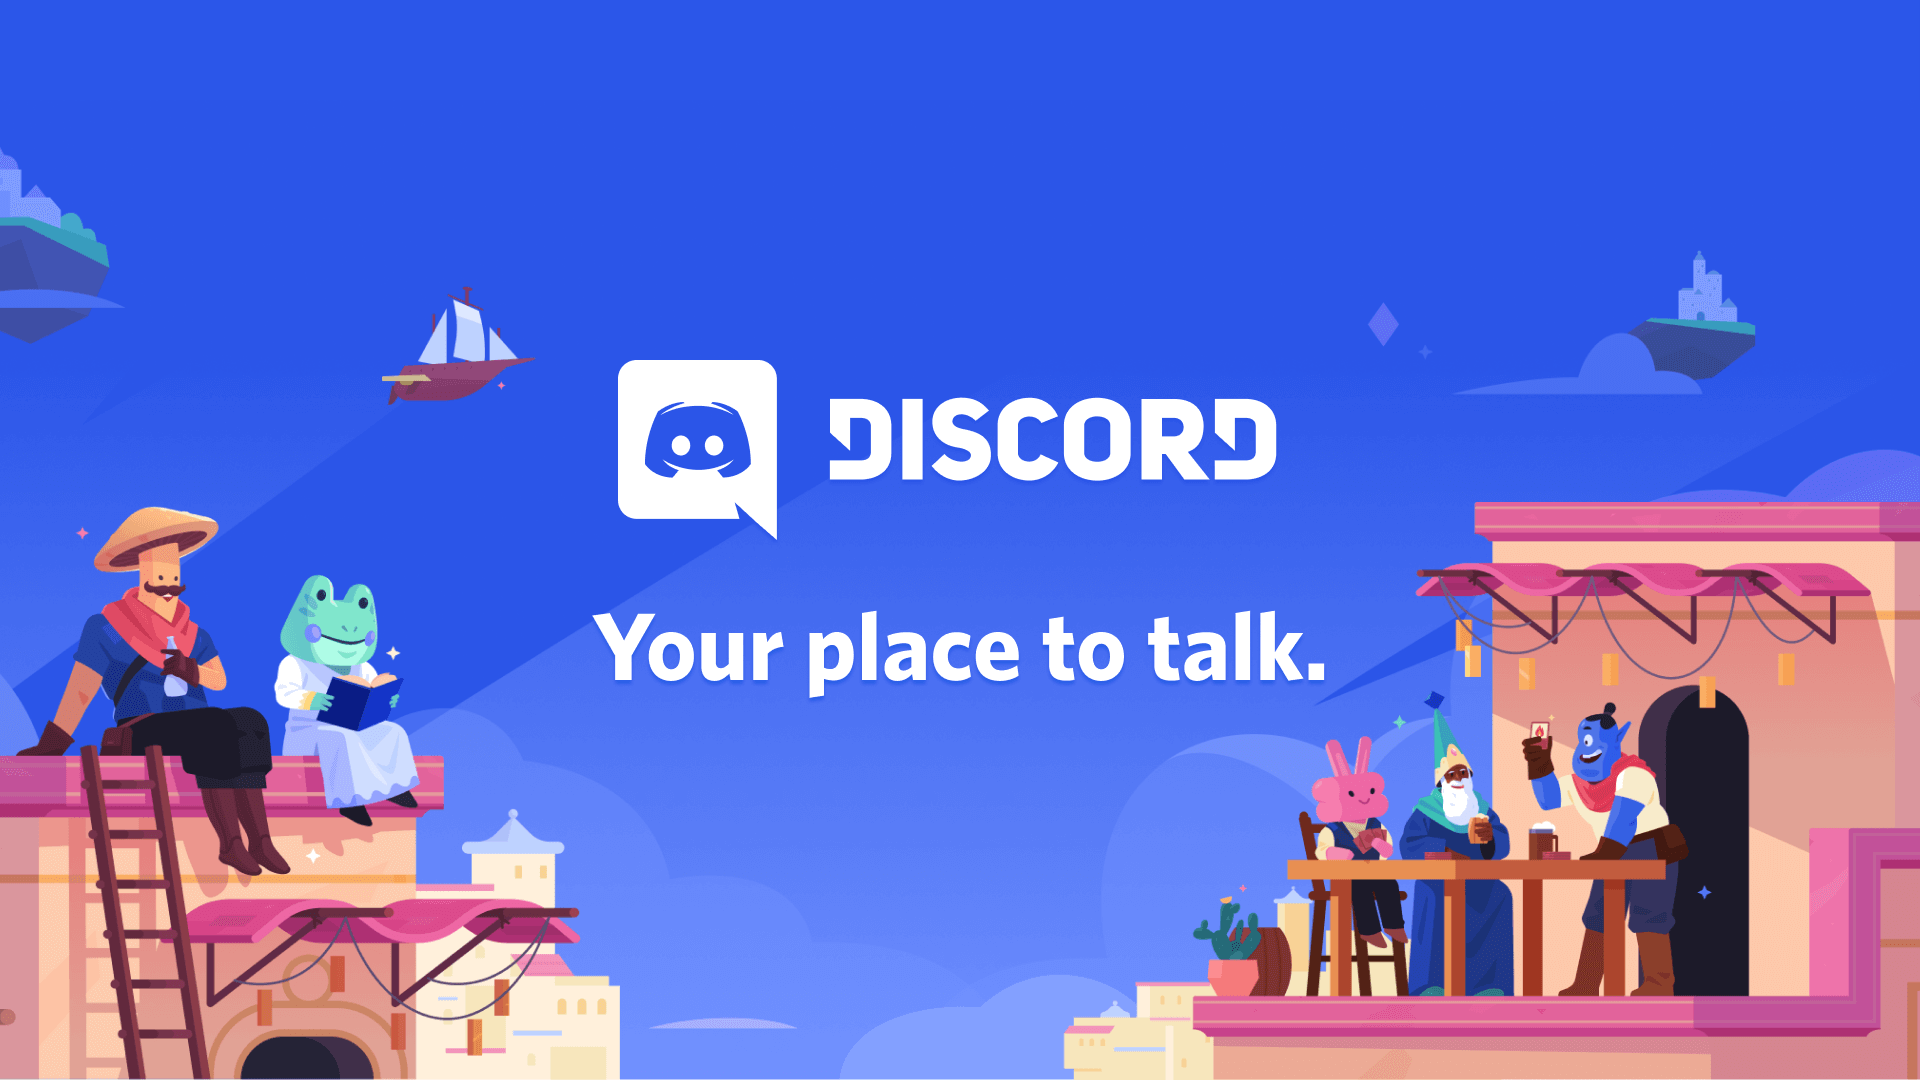 Discord's Android app now supports mobile screen sharing